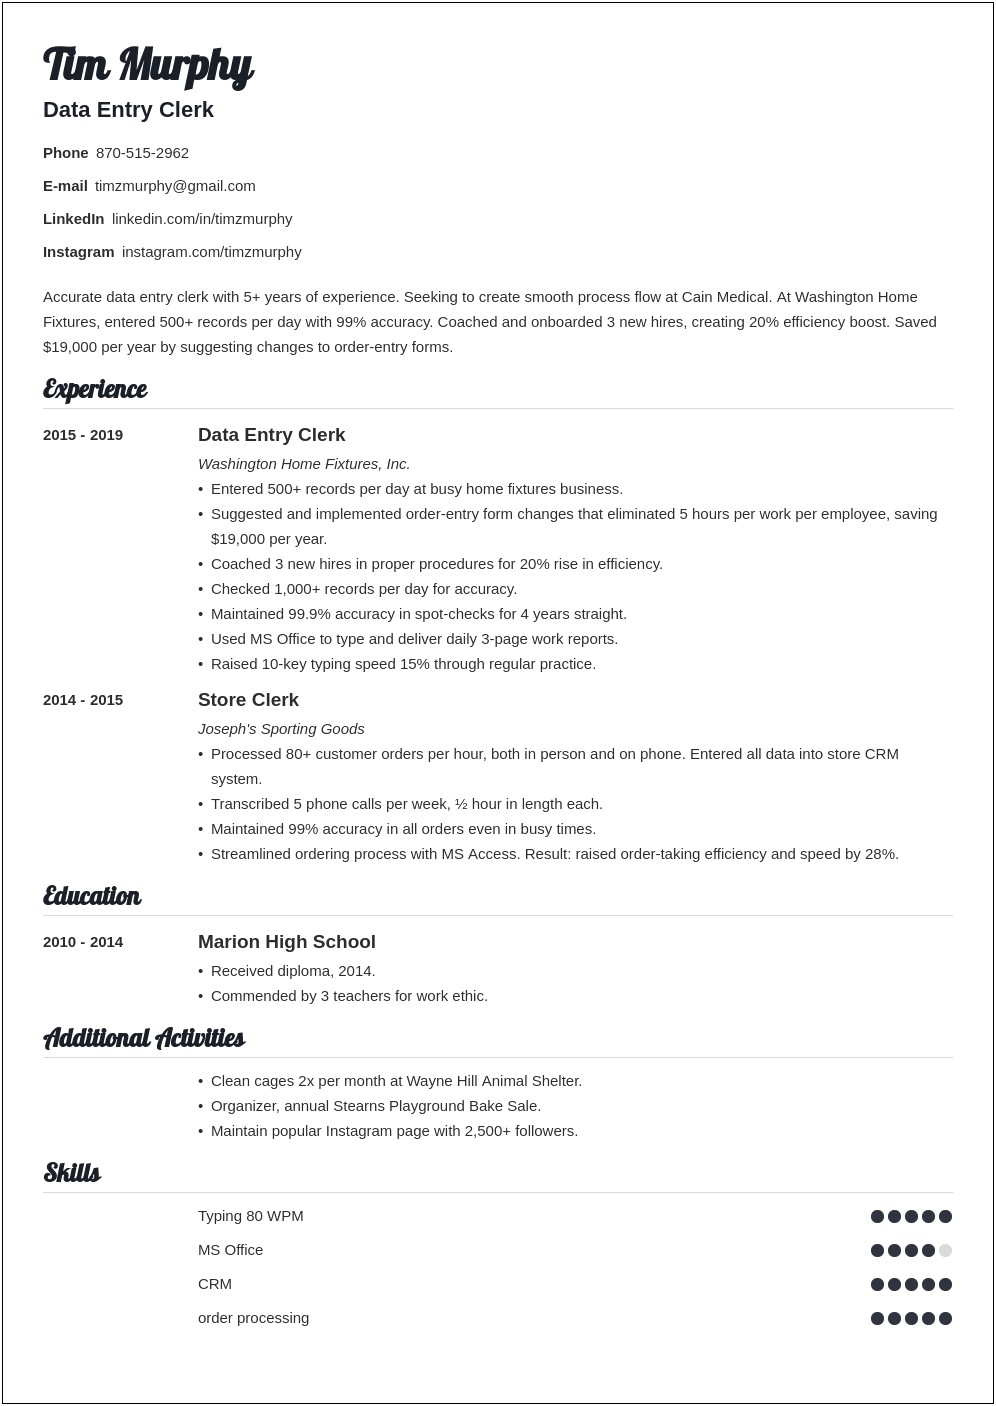 Resume Samples For Data Entry Positions